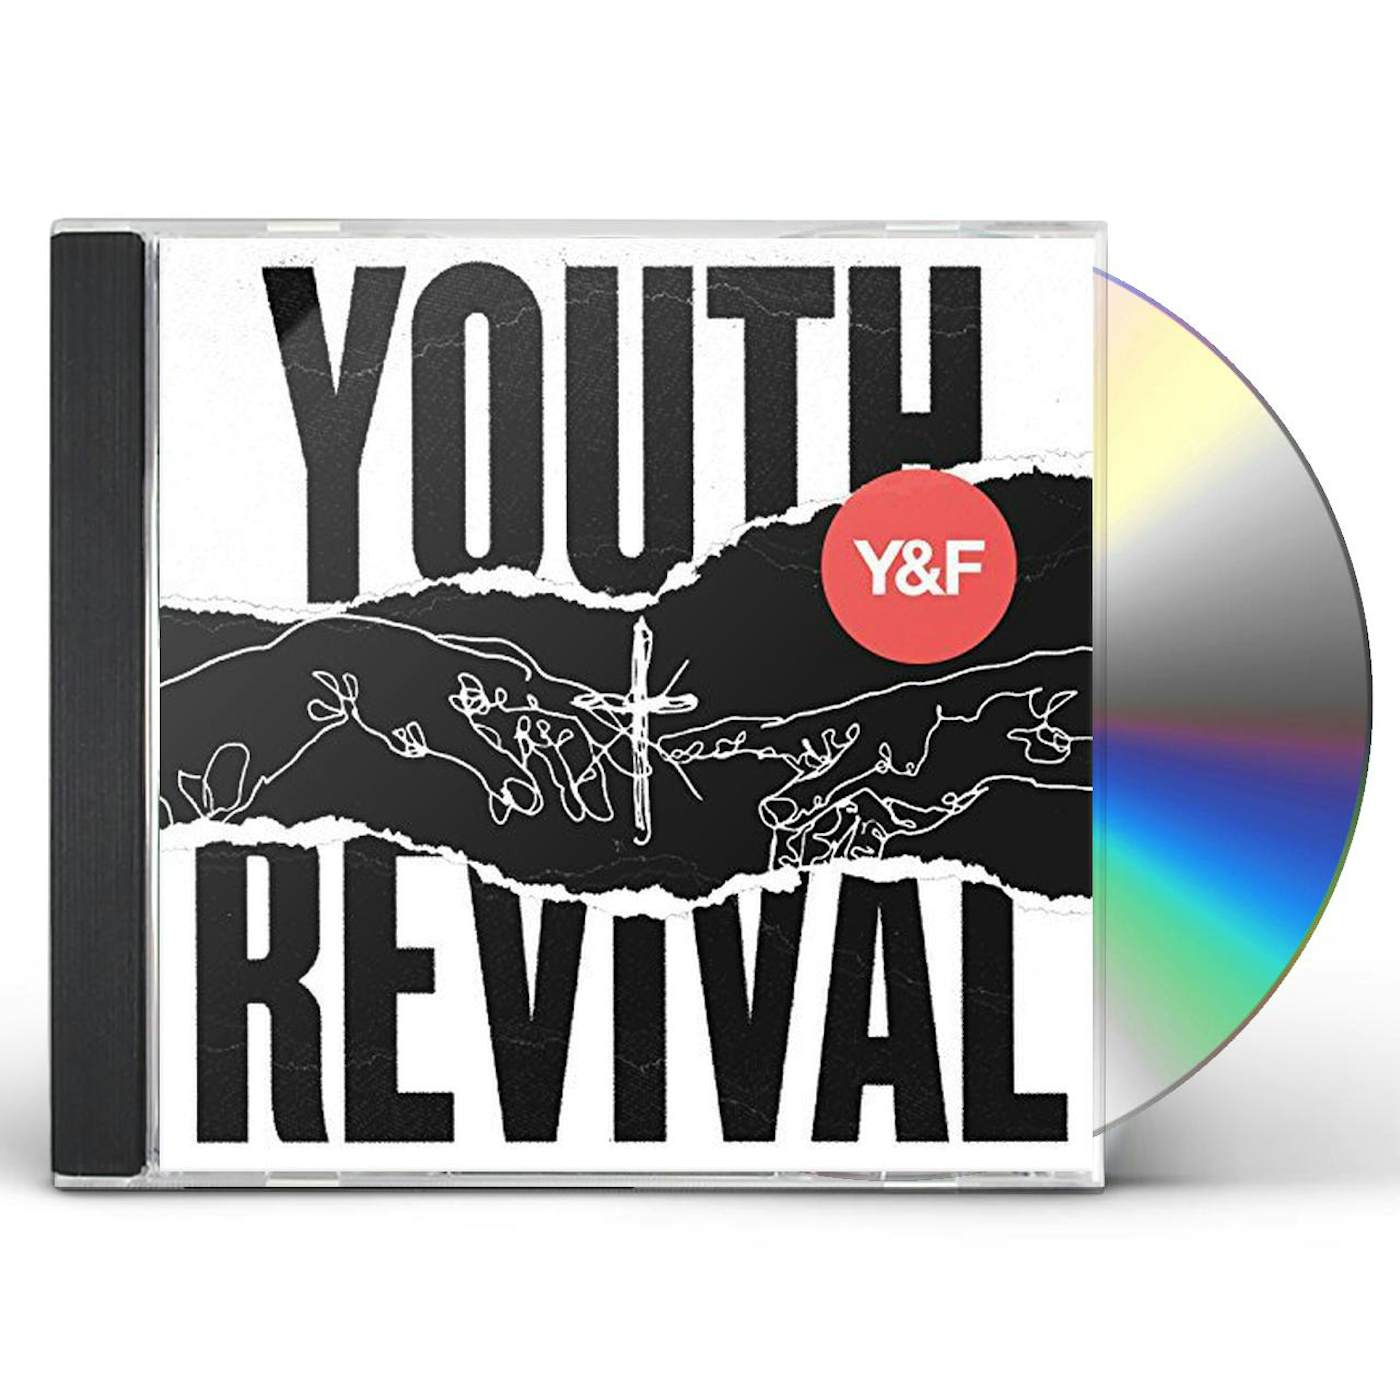 Hillsong Young & Free on New Live Album 'Youth Revival': 'The